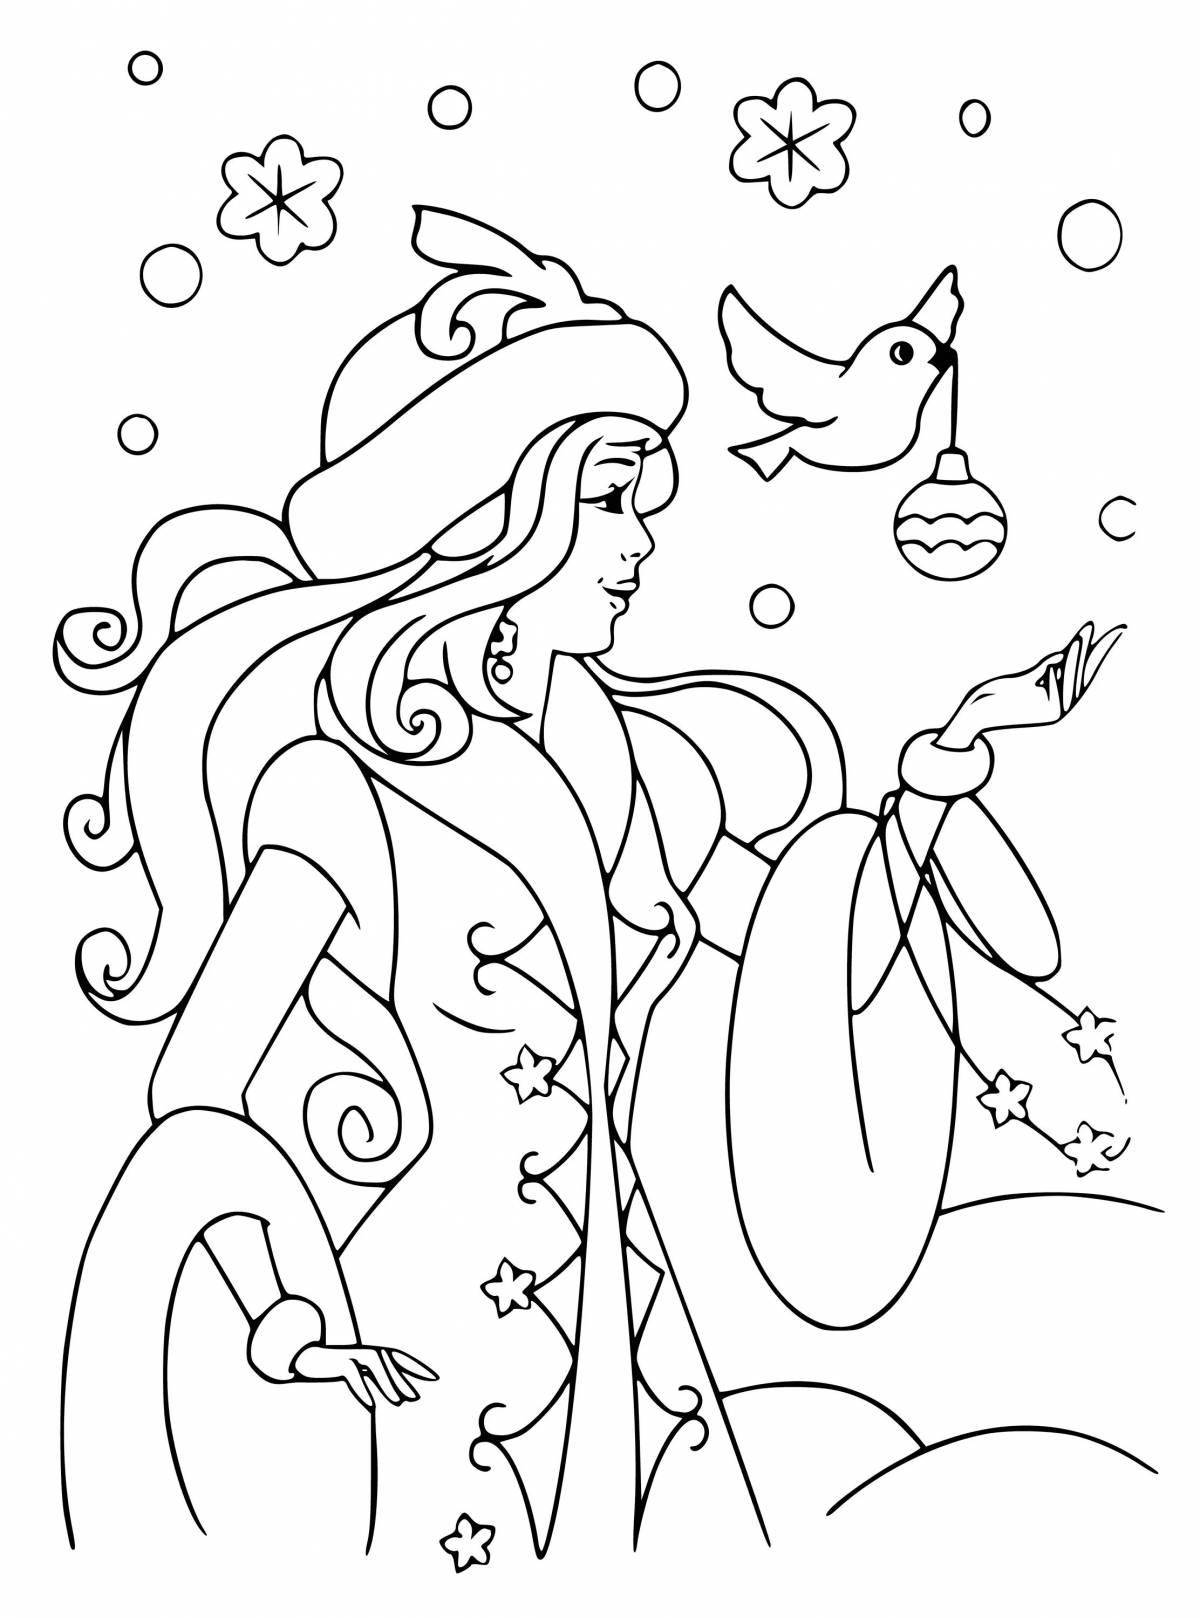 Delightful snow maiden coloring by numbers